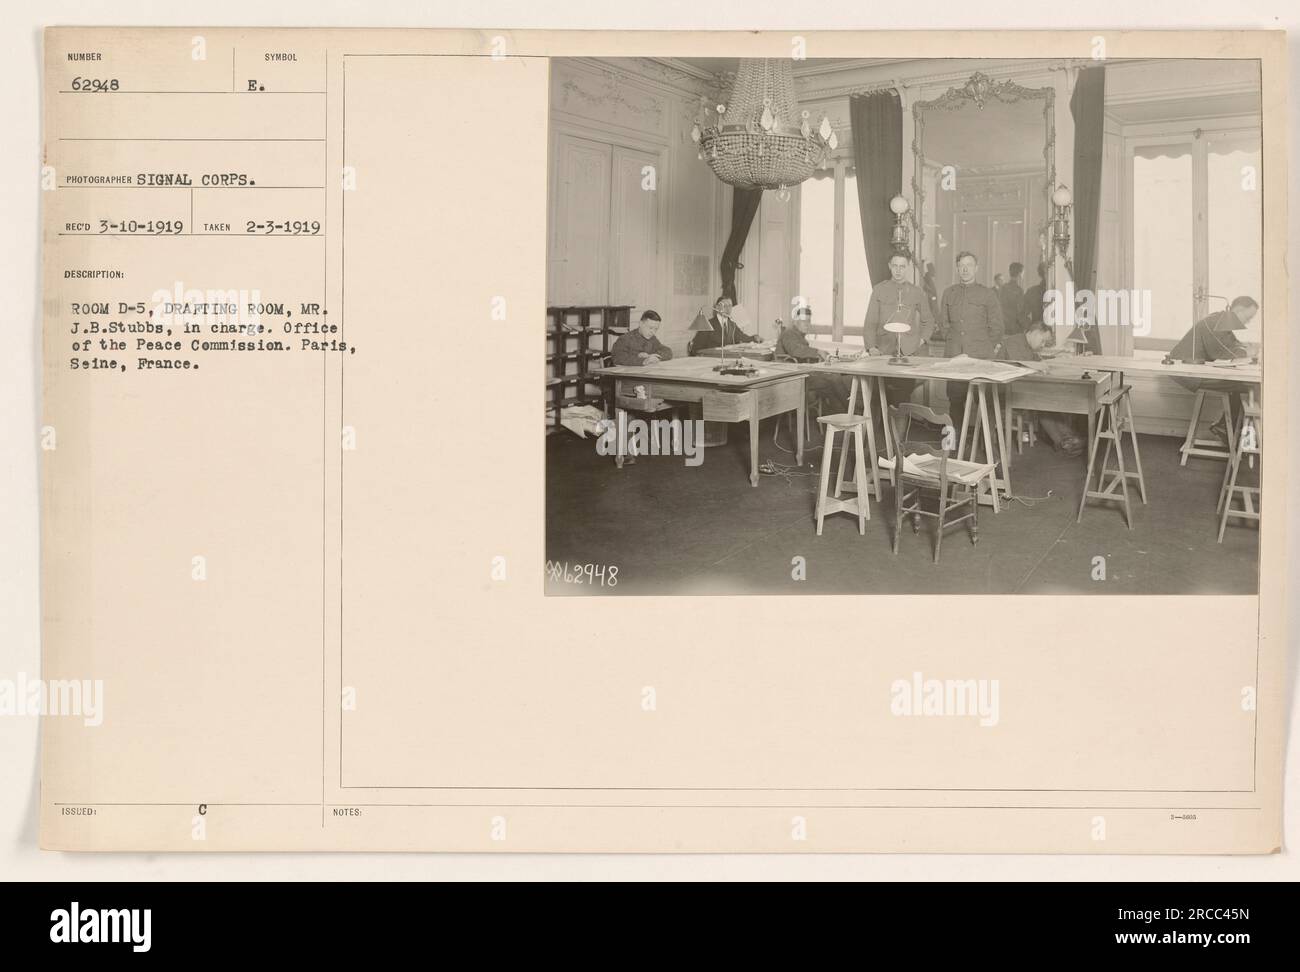 Office of the Peace Commission in Paris, France. Mr. J.B. Stubbs is in charge of the drafting room, identified as Room D-5. The photo was taken on February 3, 1919, by the Signal Corps. This image is part of the numbering system, with the description and notes listed as 18SUED 62948. Stock Photo